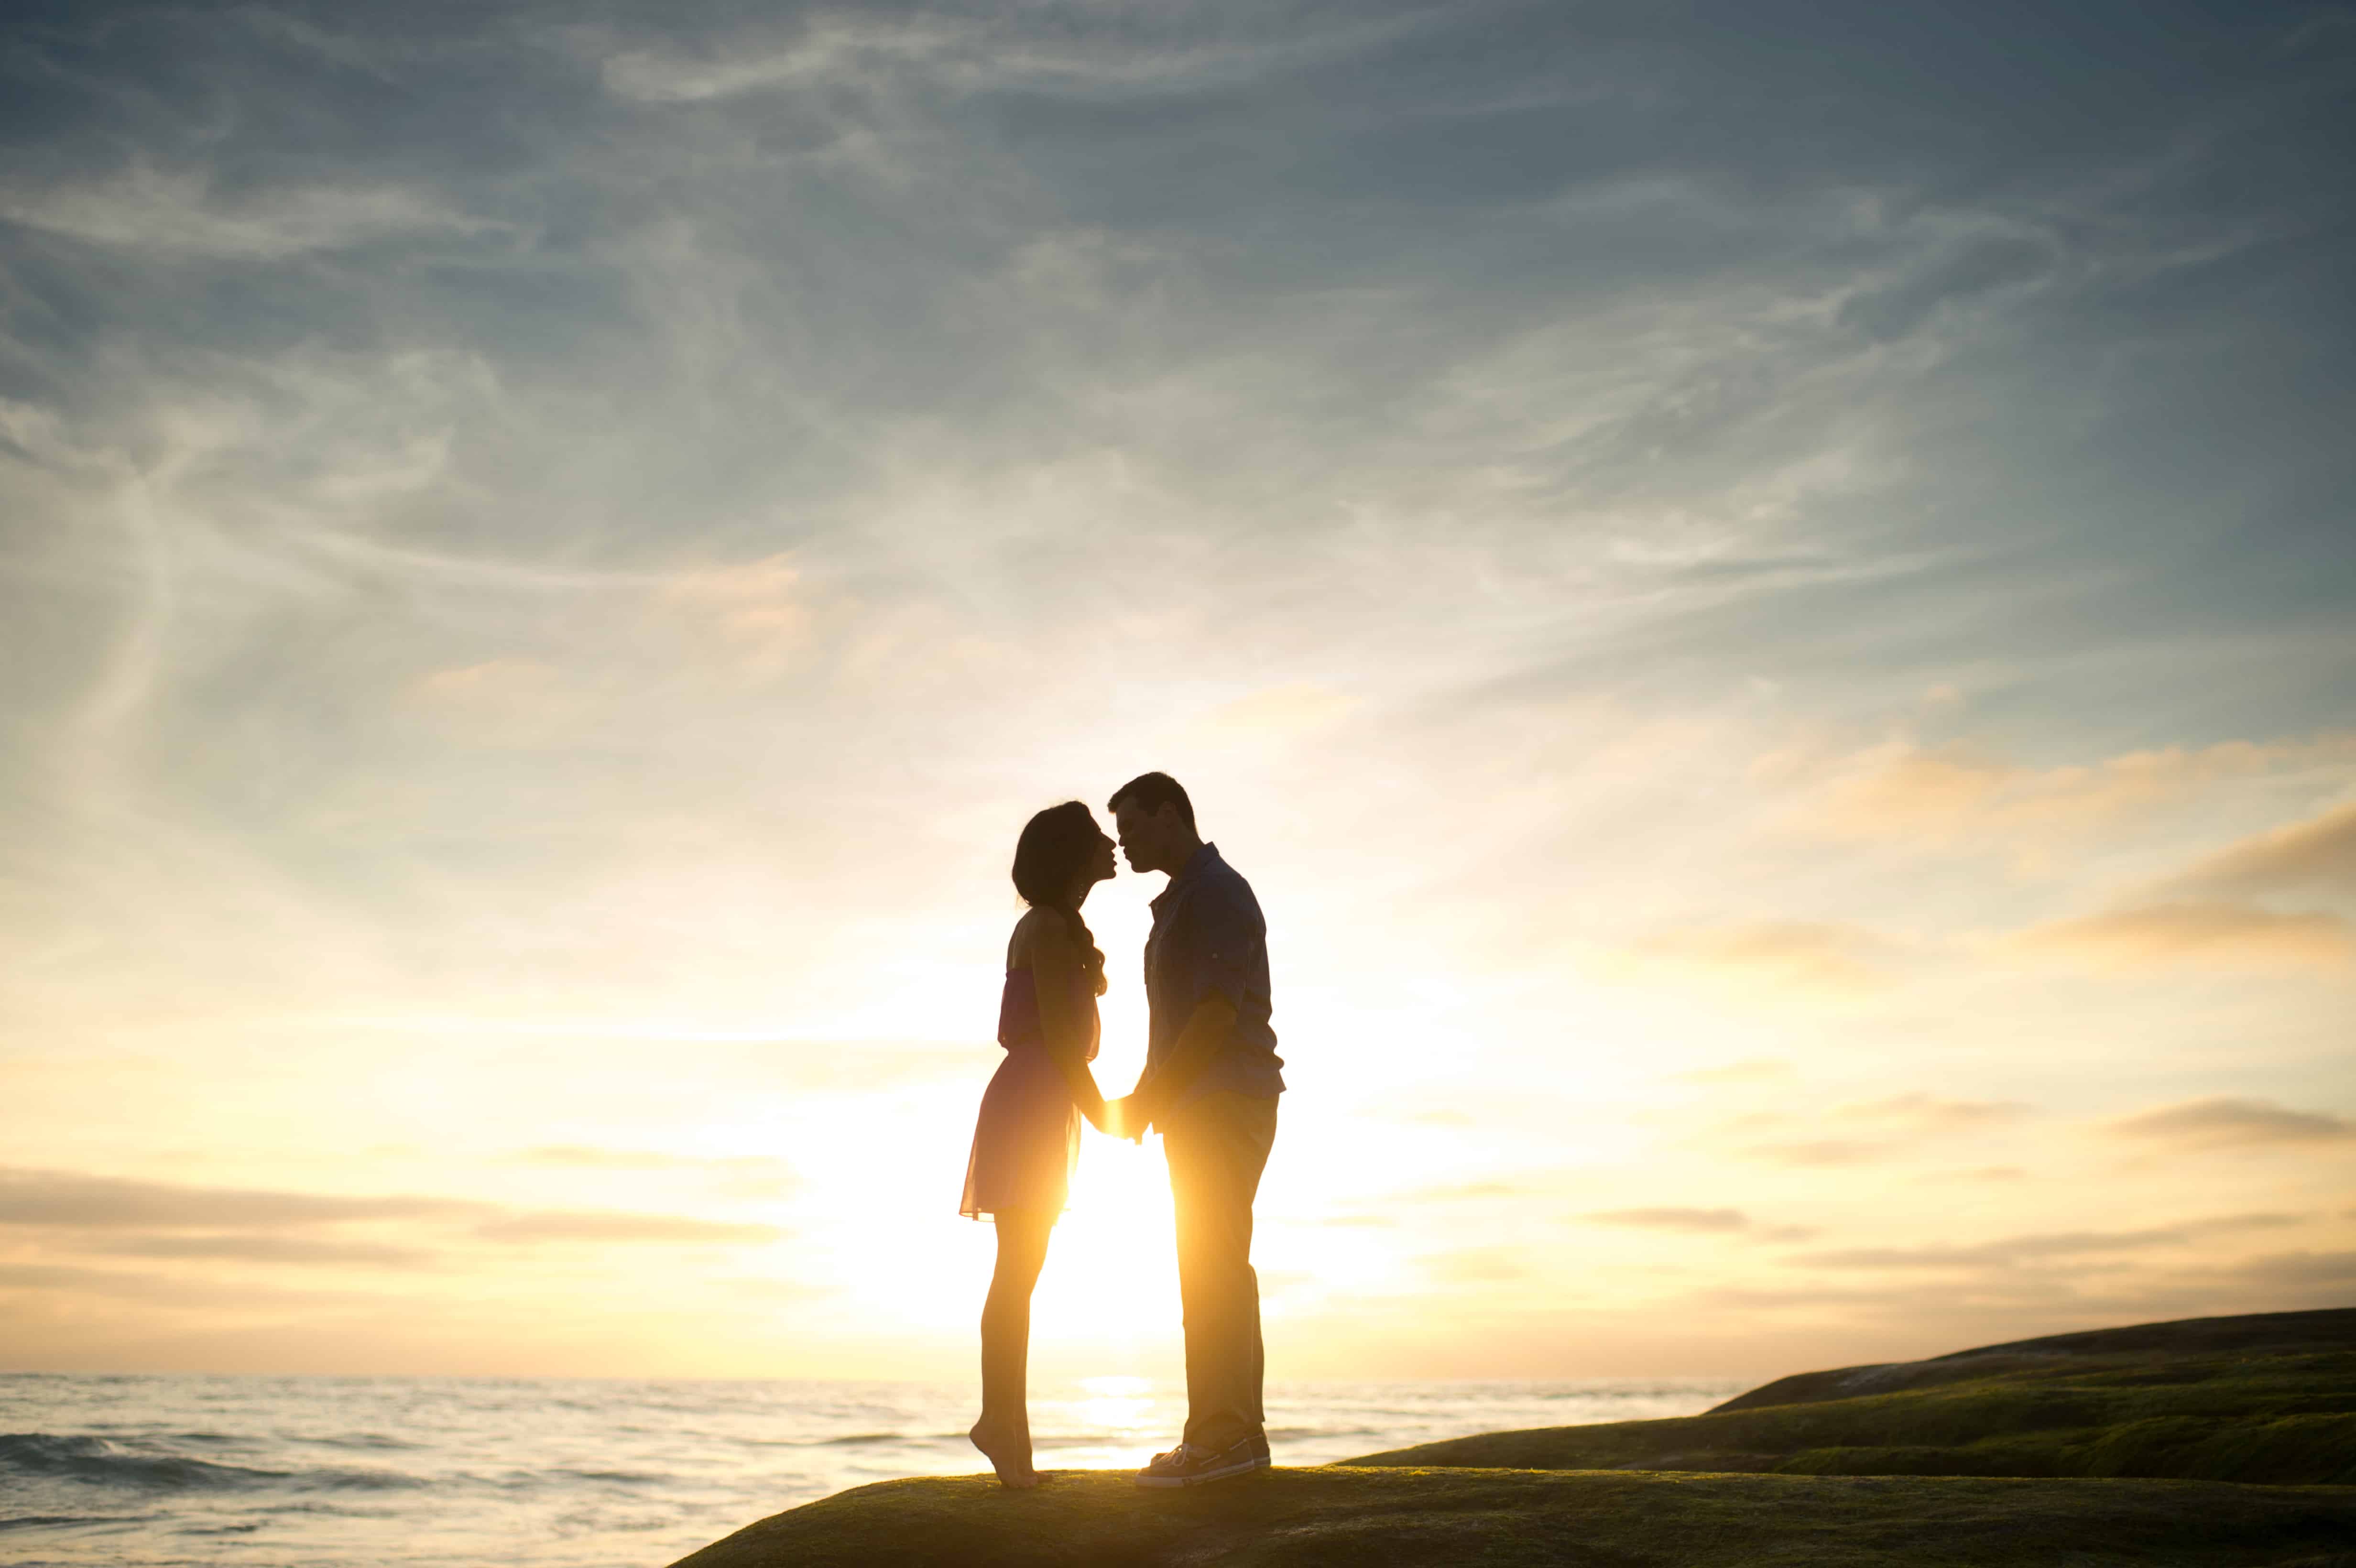 Silhouette of couple on beach